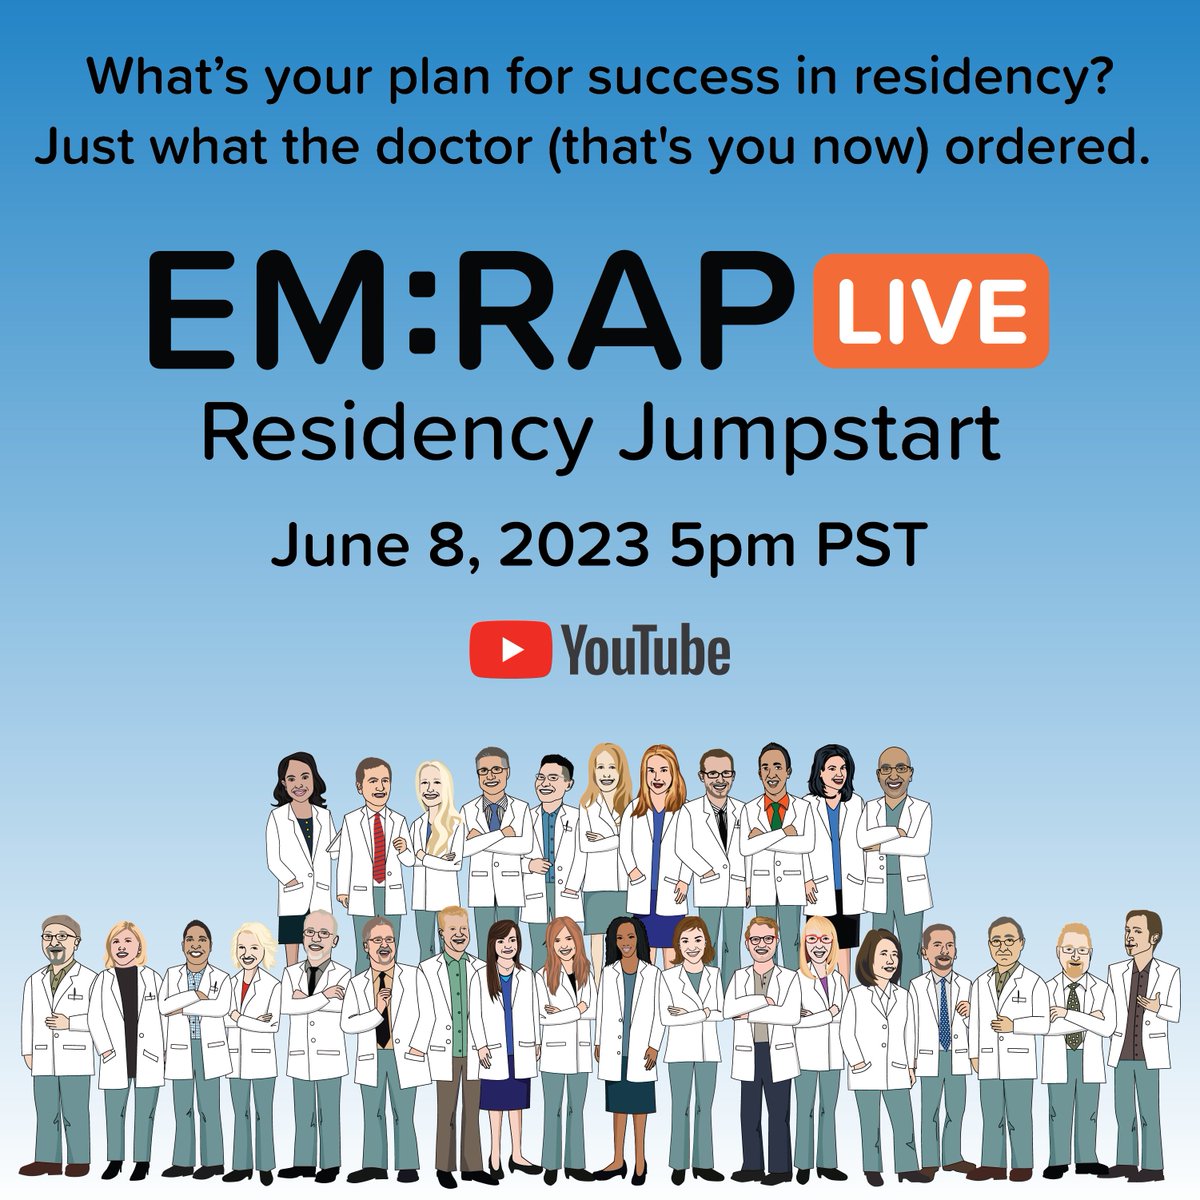 📷 New interns, are you ready? EM:RAP's New Resident Jumpstart event is your chance to learn from the best in the field. Join our discussion on June 8th, 5pm PST. Master navigating your intern year with confidence. Don't miss out. register for free today! mailchi.mp/emrap.org/gn7p…